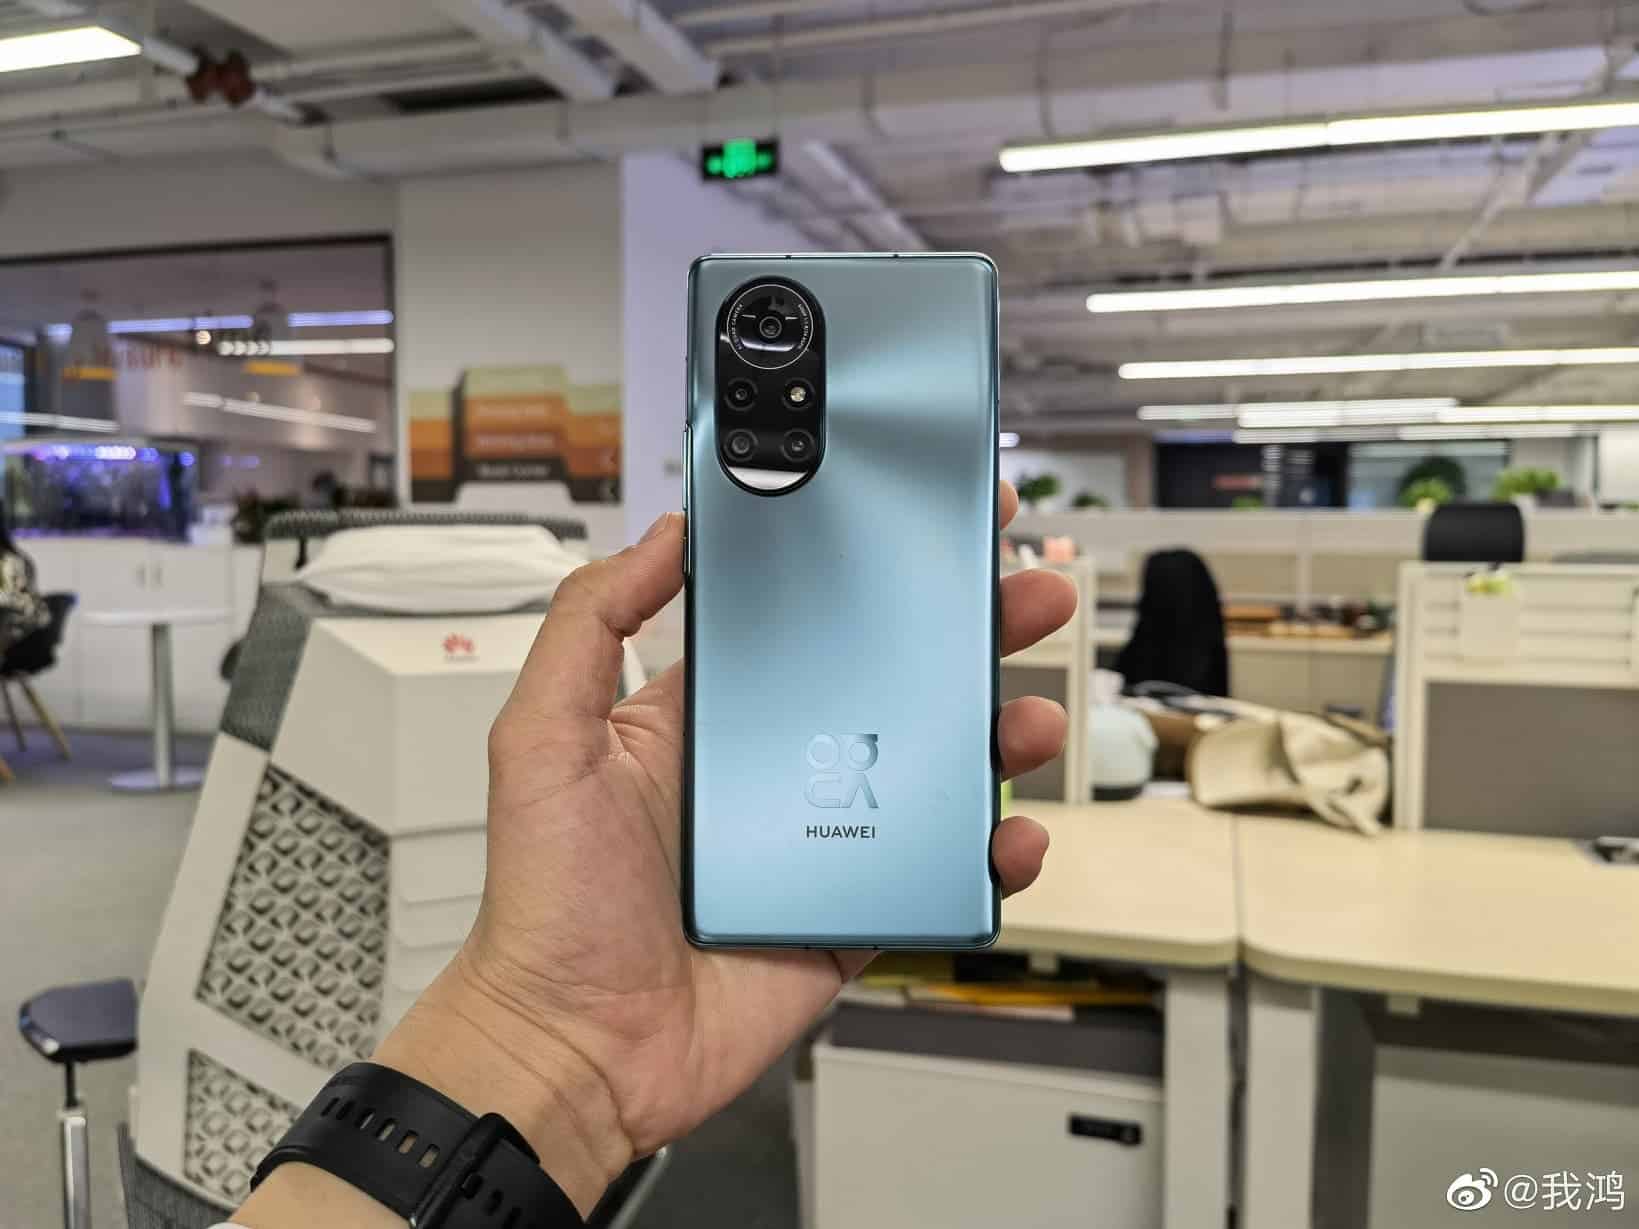 Zuigeling Bovenstaande India Huawei Nova 8 Pro To Support 60Hz, 120Hz, and Smart Refresh Rate